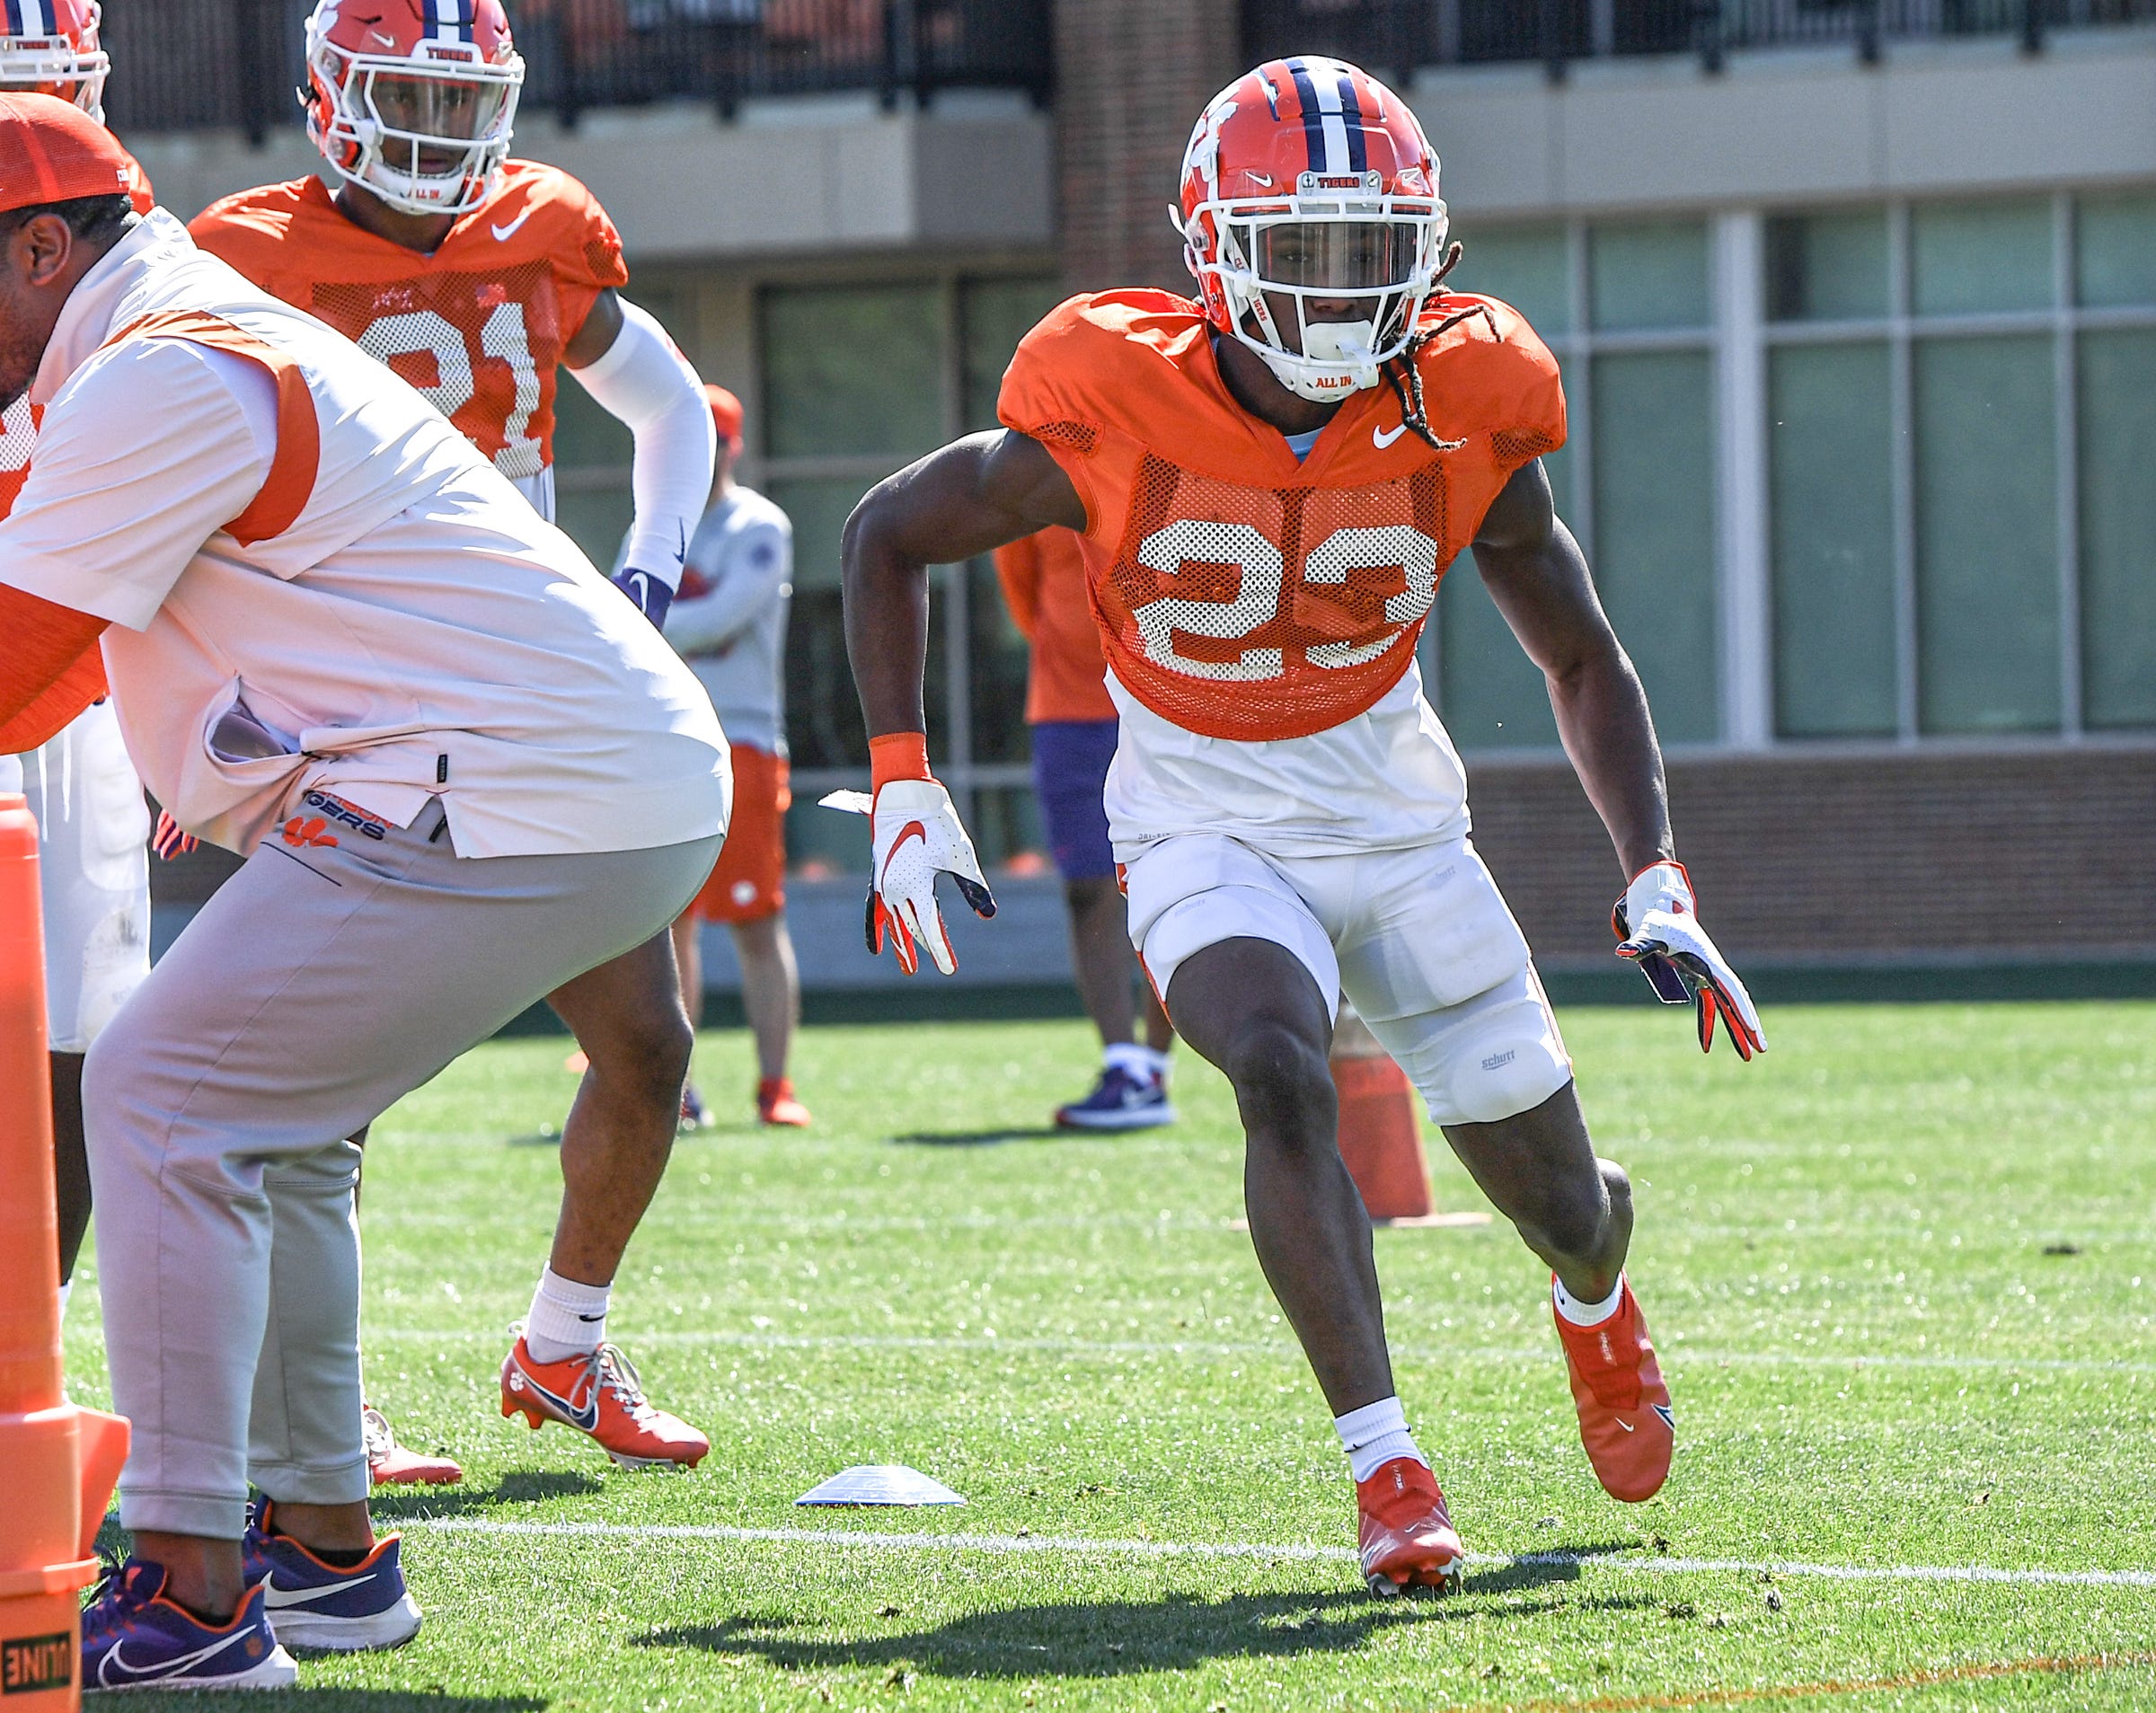 Clemson Tigers cornerback Toriano Pride goes through a drill at practice.